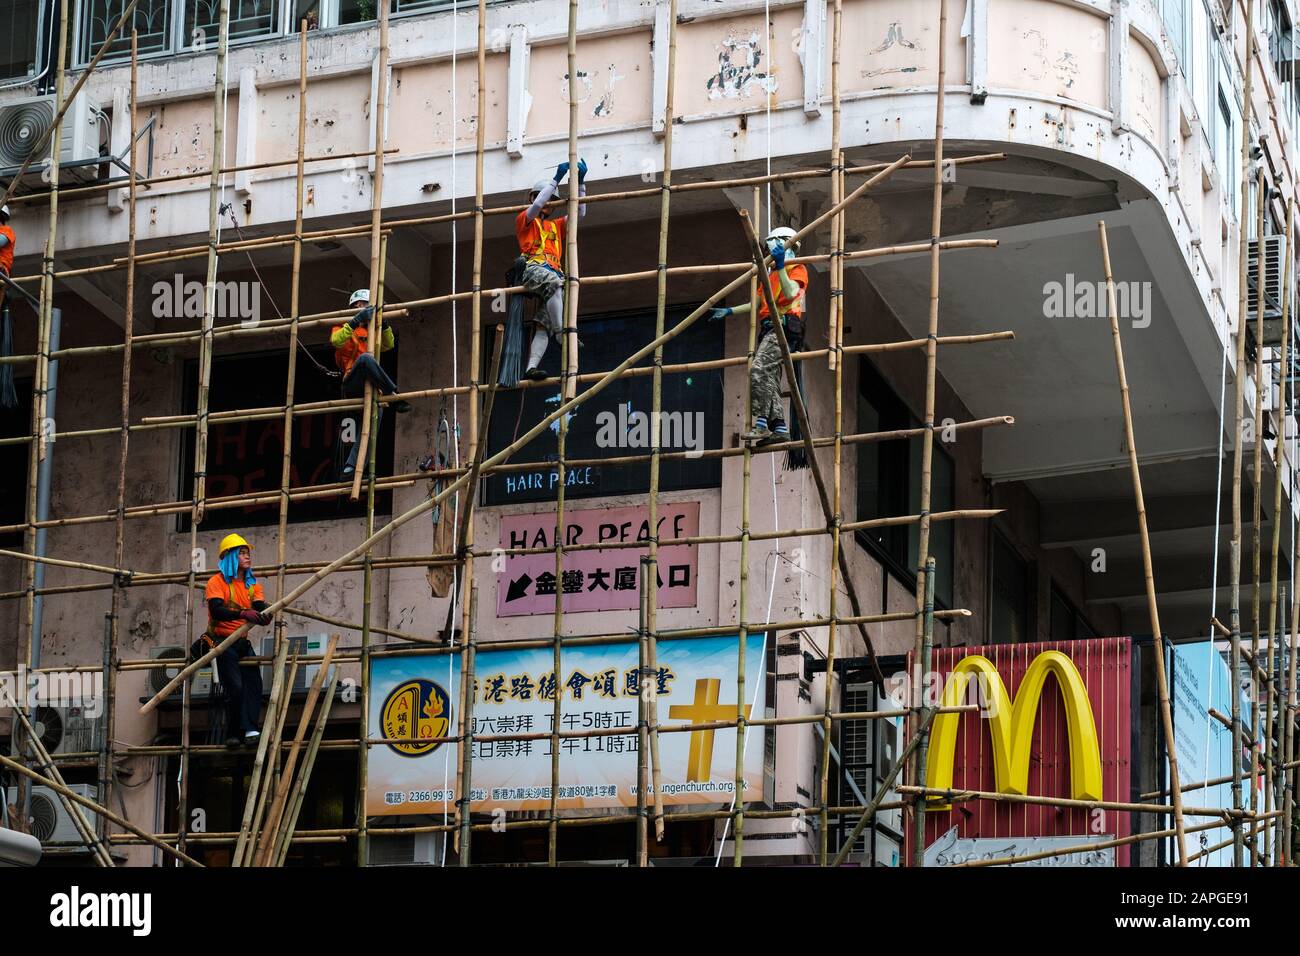 Hong Kong, November, 2019: Workers on construction site building bamboo scaffolding on house facade in Hong Kong Stock Photo